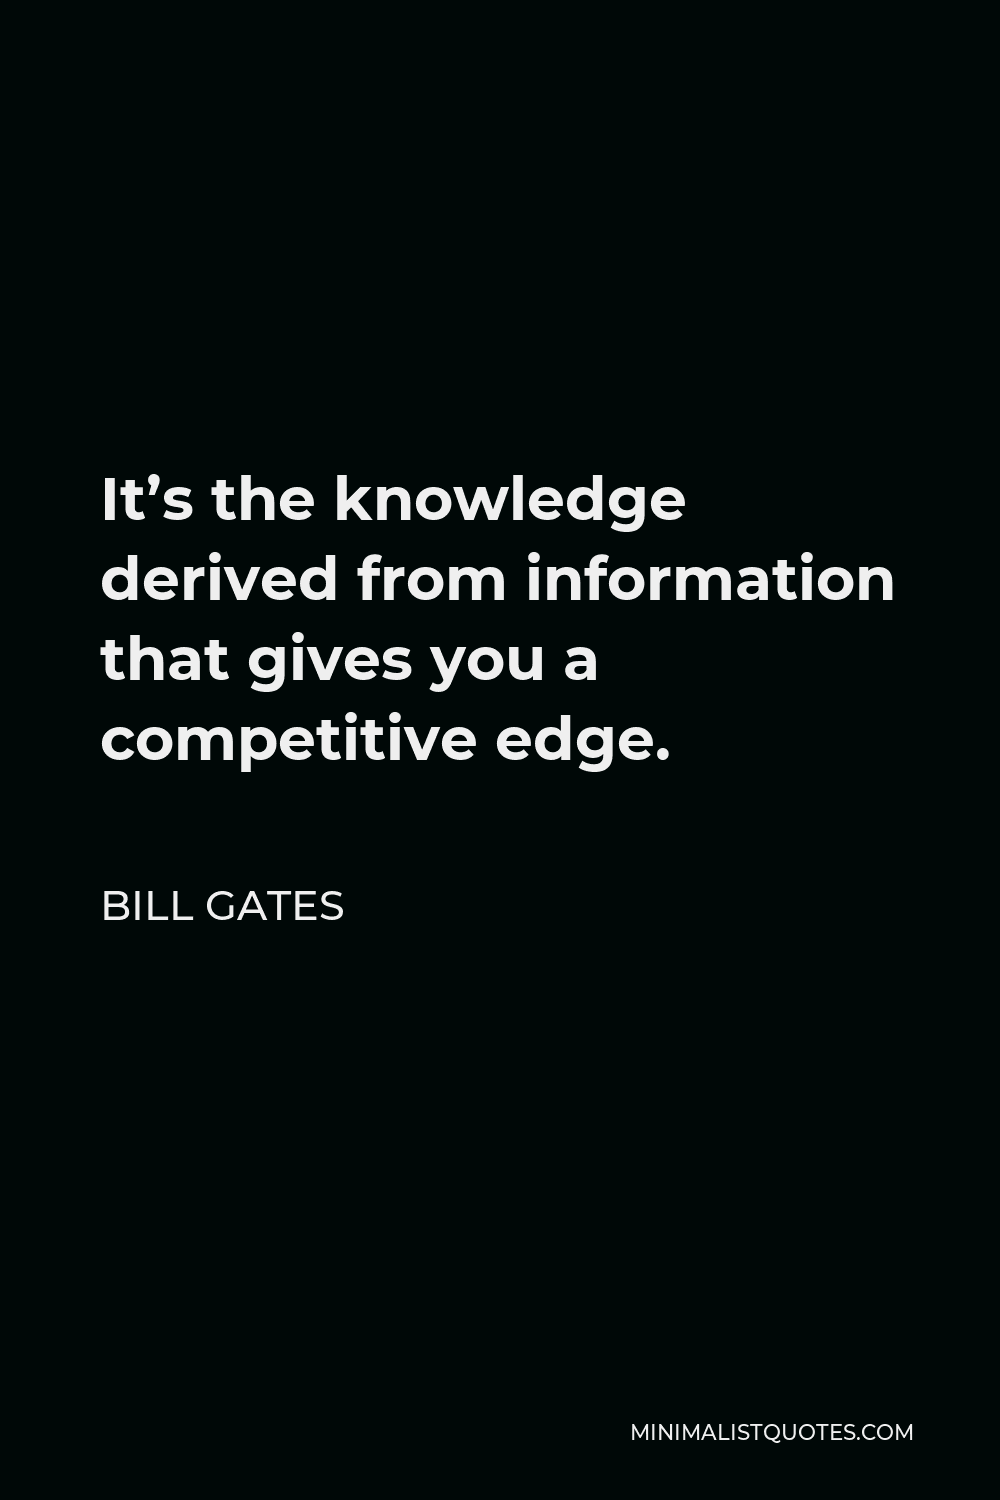 Bill Gates Quote - It’s the knowledge derived from information that gives you a competitive edge.